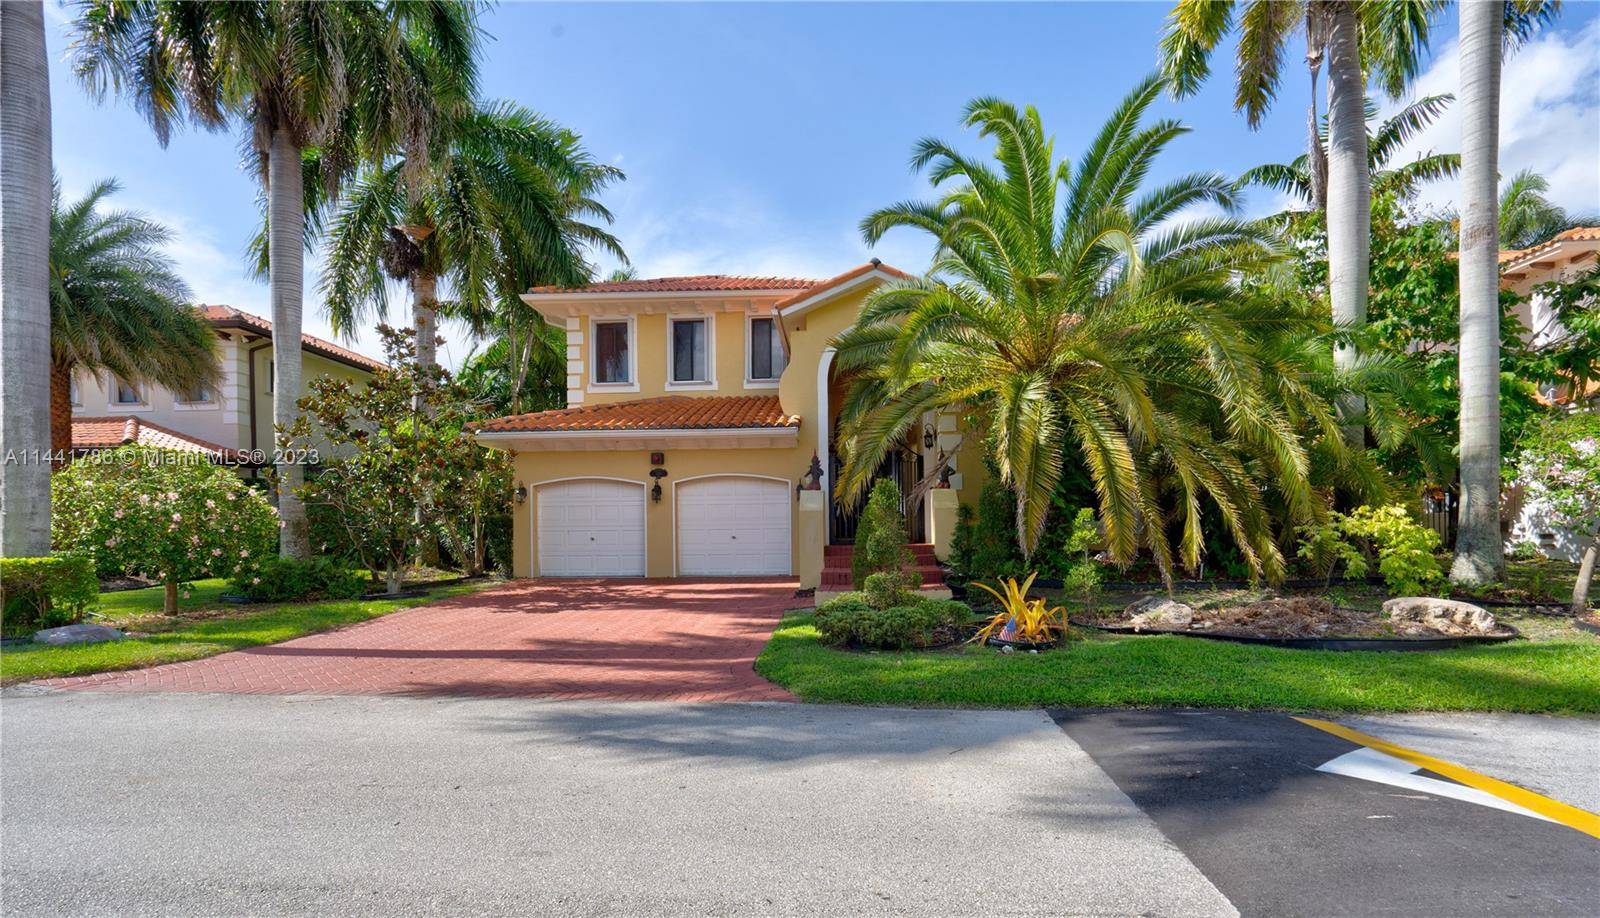 PRESENTING This 5 Bedroom 4 1 2 Bath COURTYARD STYLE Home in the Cutler Cay Gated Community.